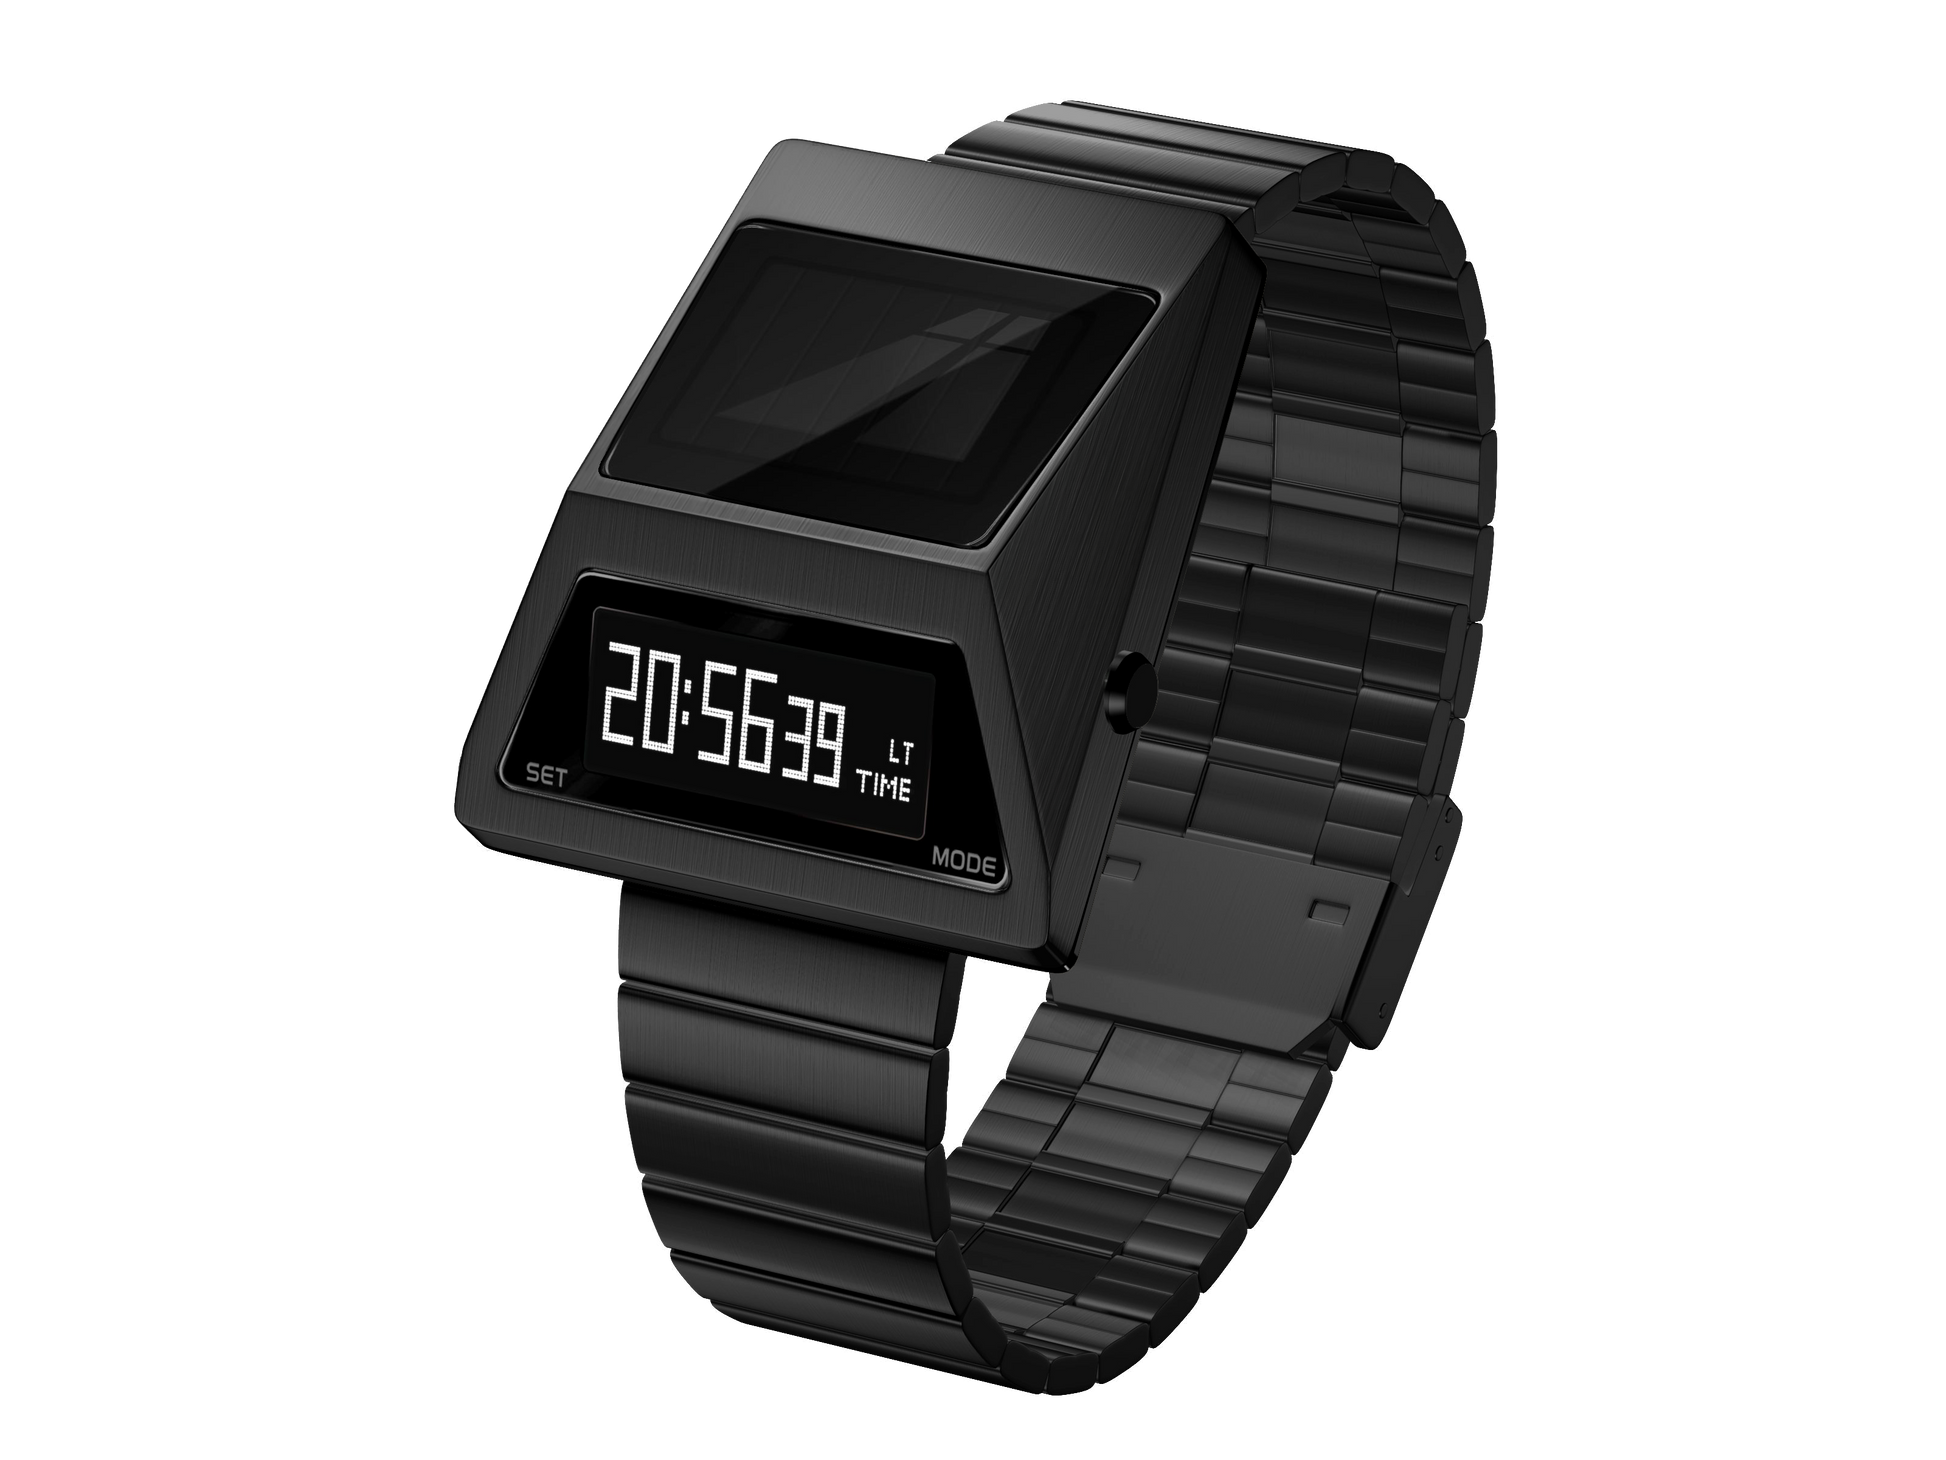 solar-powered-cyber-watches-s3000B-R-front view